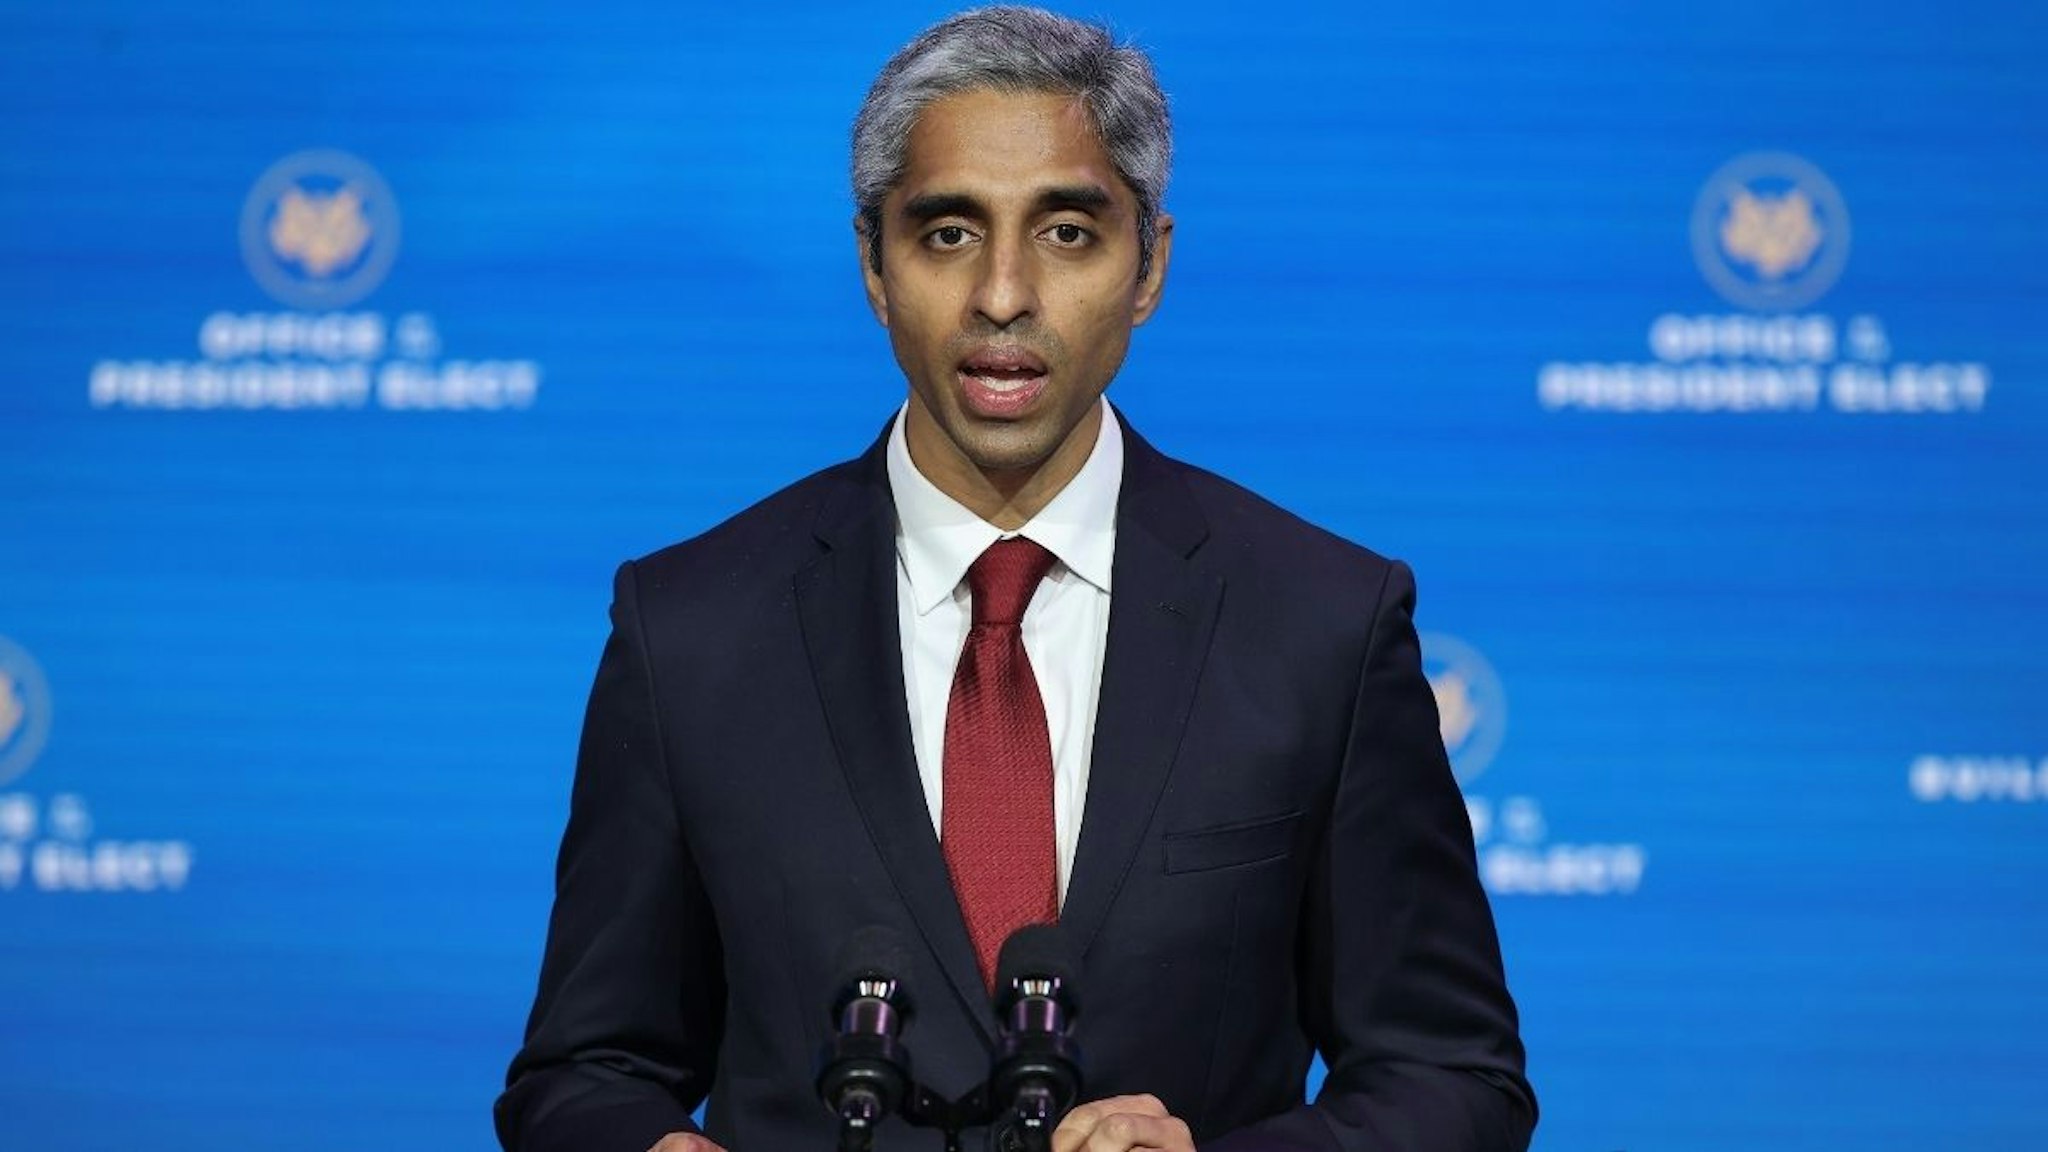 Dr. Vivek Murthy, President-elect Joe Biden’s pick to be U.S. surgeon general, speaks during a news conference at the Queen Theater December 08, 2020 in Wilmington, Delaware.